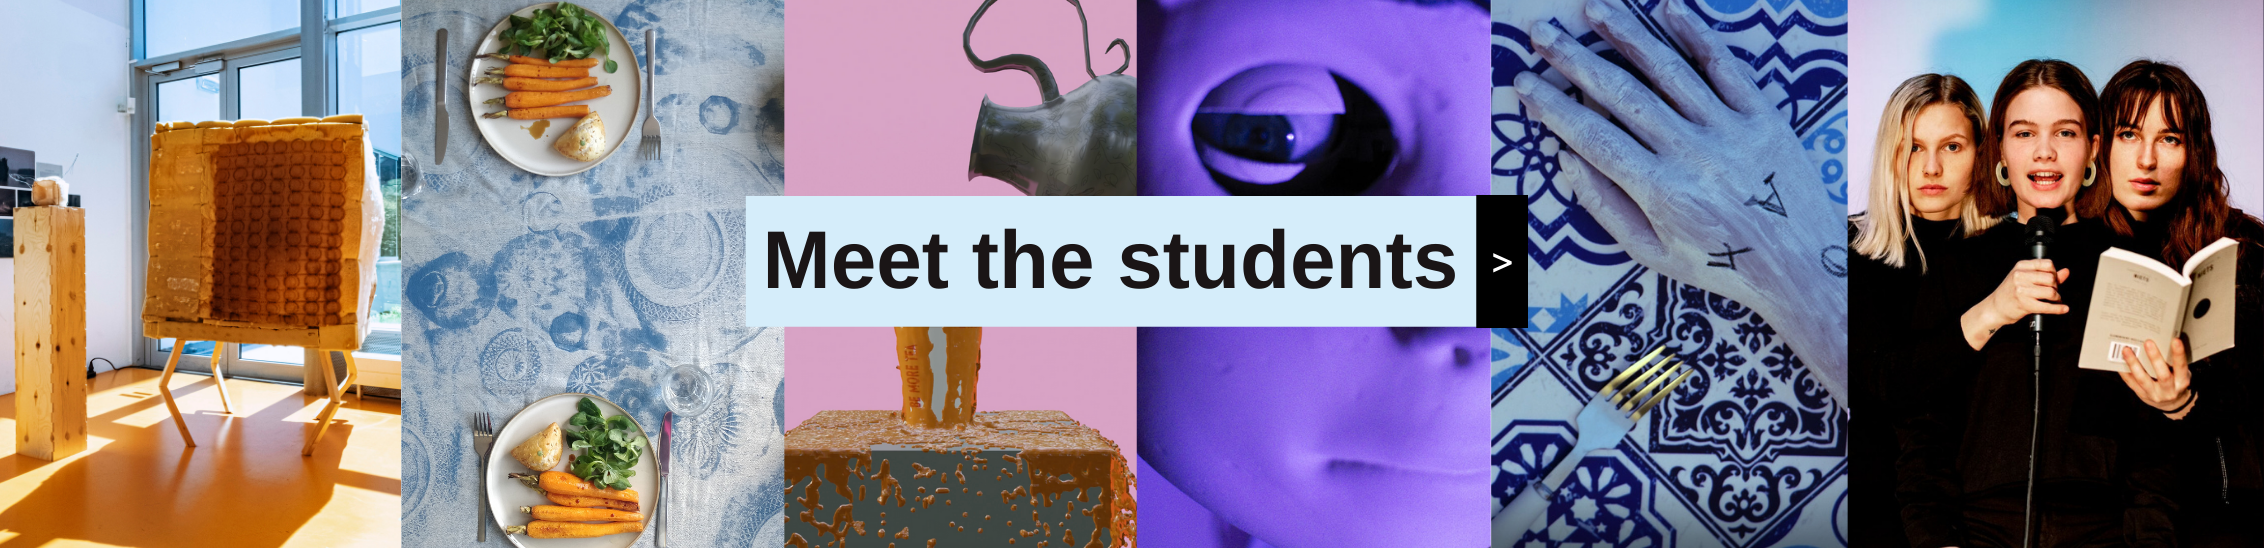 Discover the students